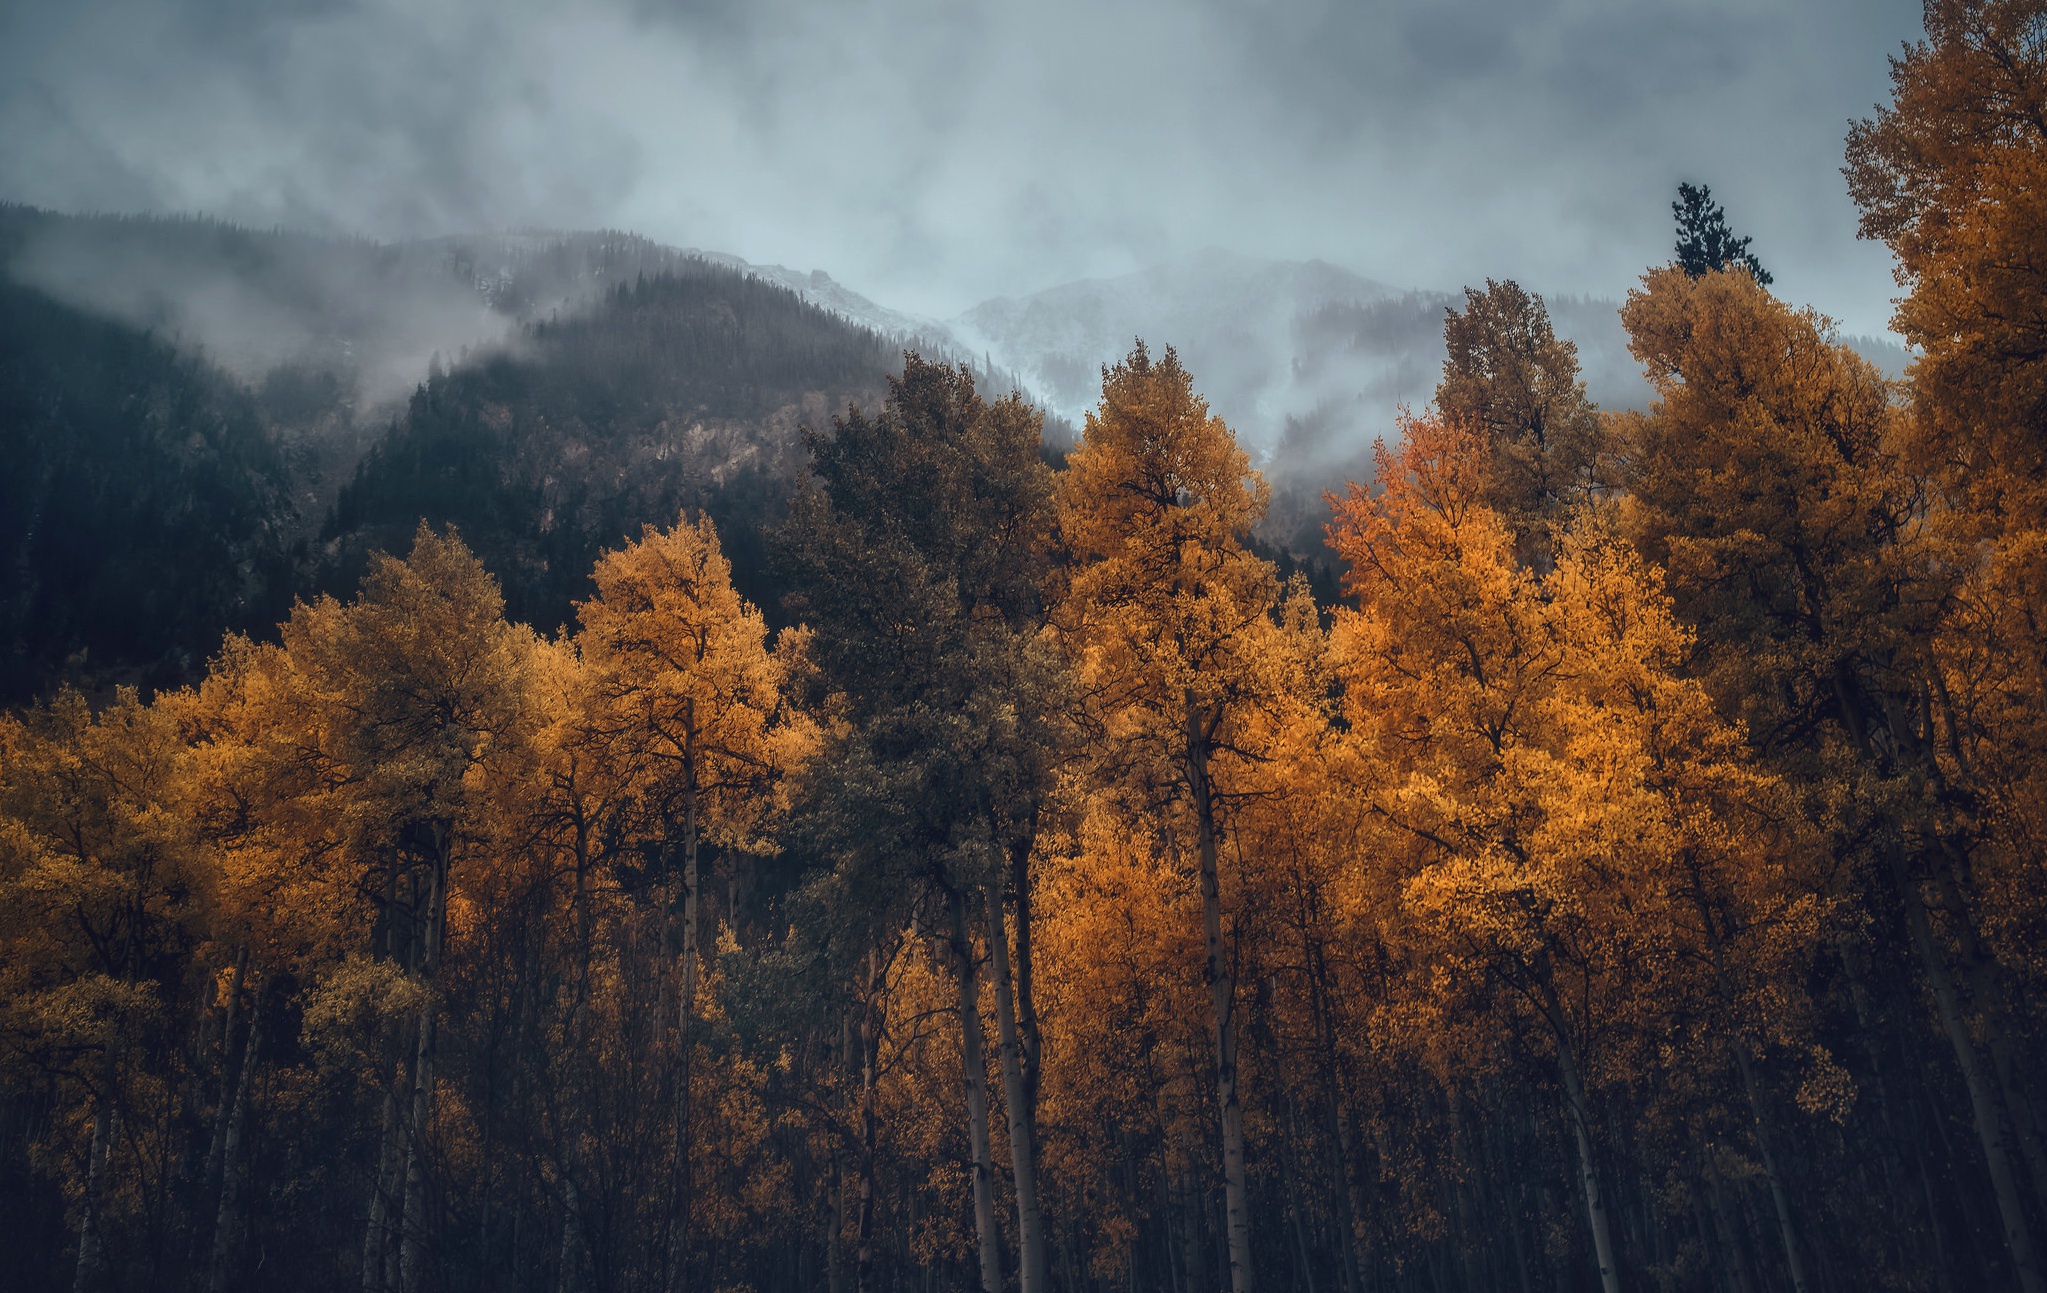 General 2047x1293 fall trees nature mountains forest mist